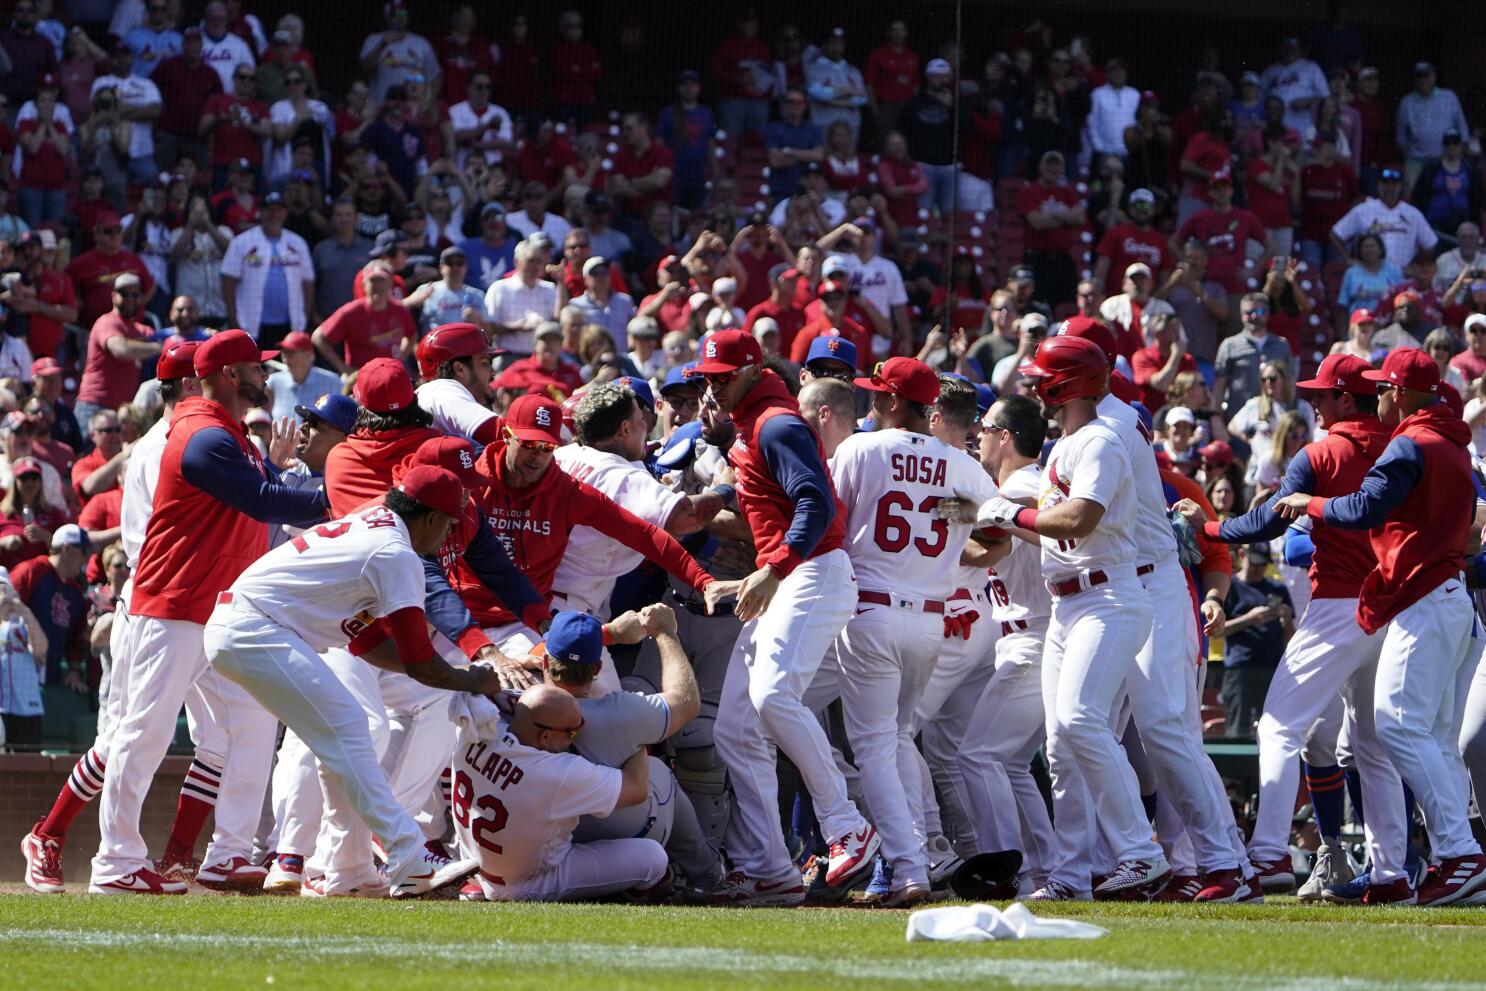 St. Louis Cardinals-Reds game: Benches clear Castellanos ejected